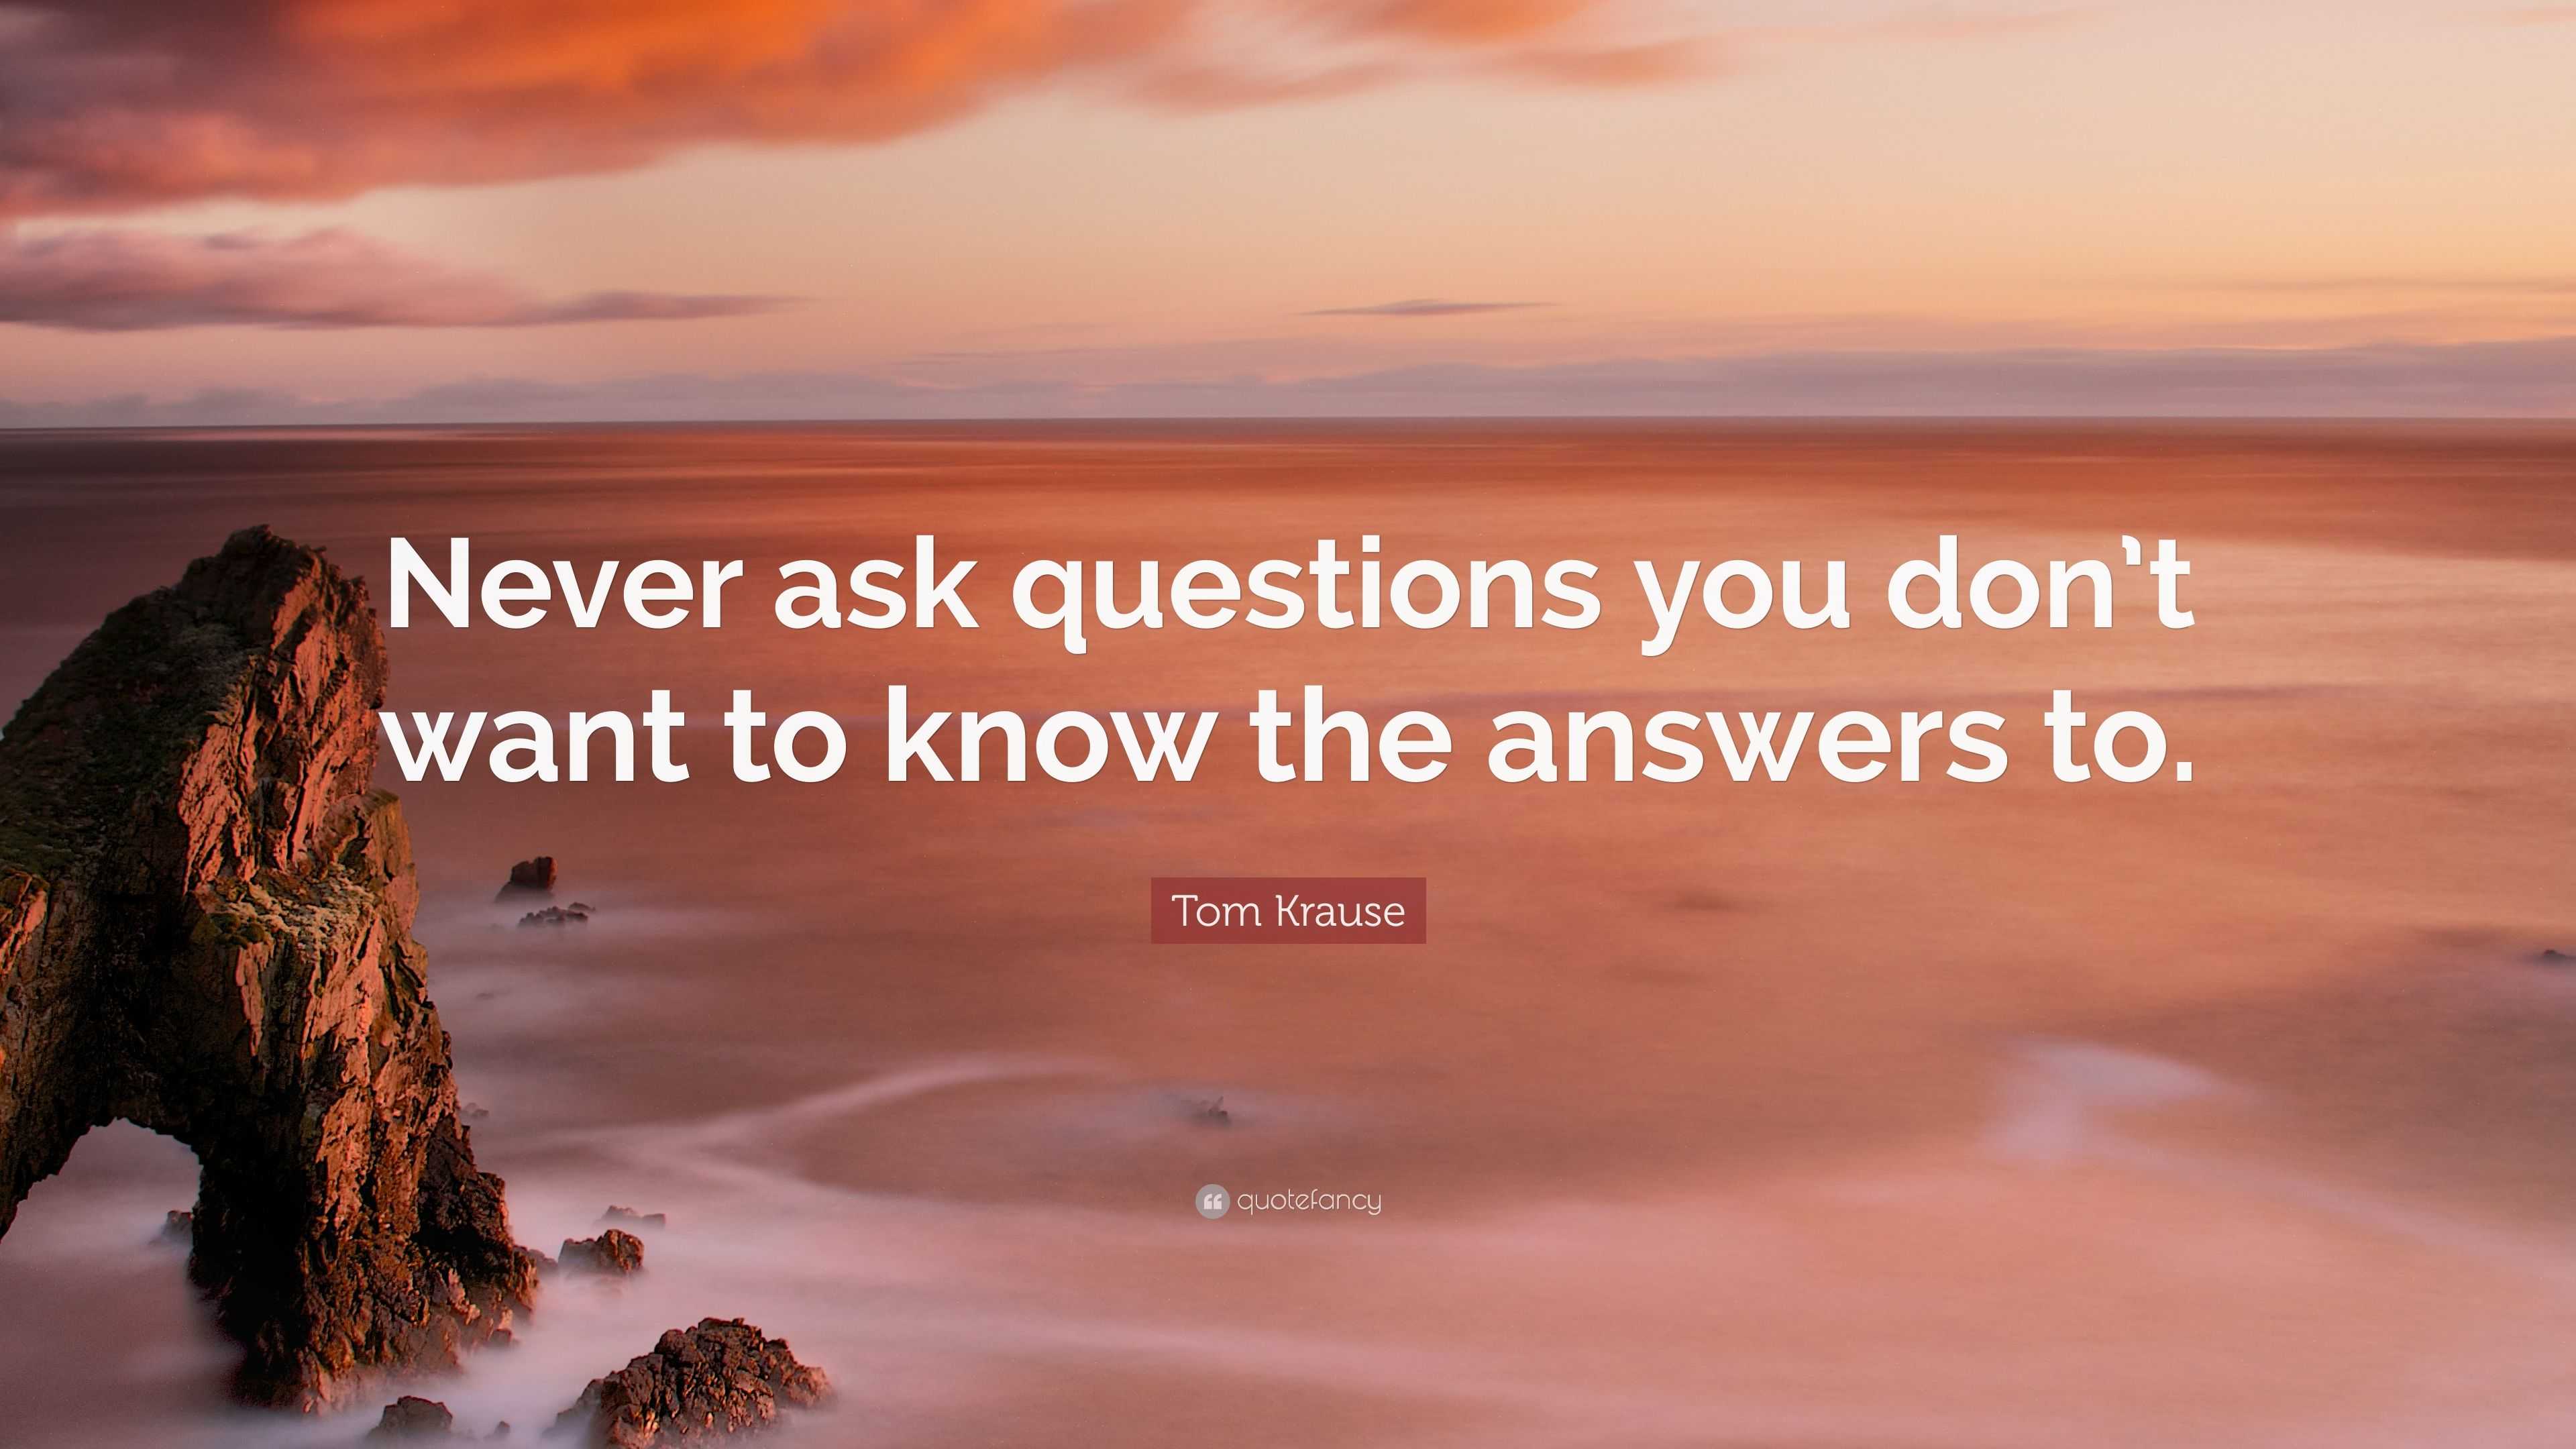 4696277-Tom-Krause-Quote-Never-ask-questions-you-don-t-want-to-know-the.jpg